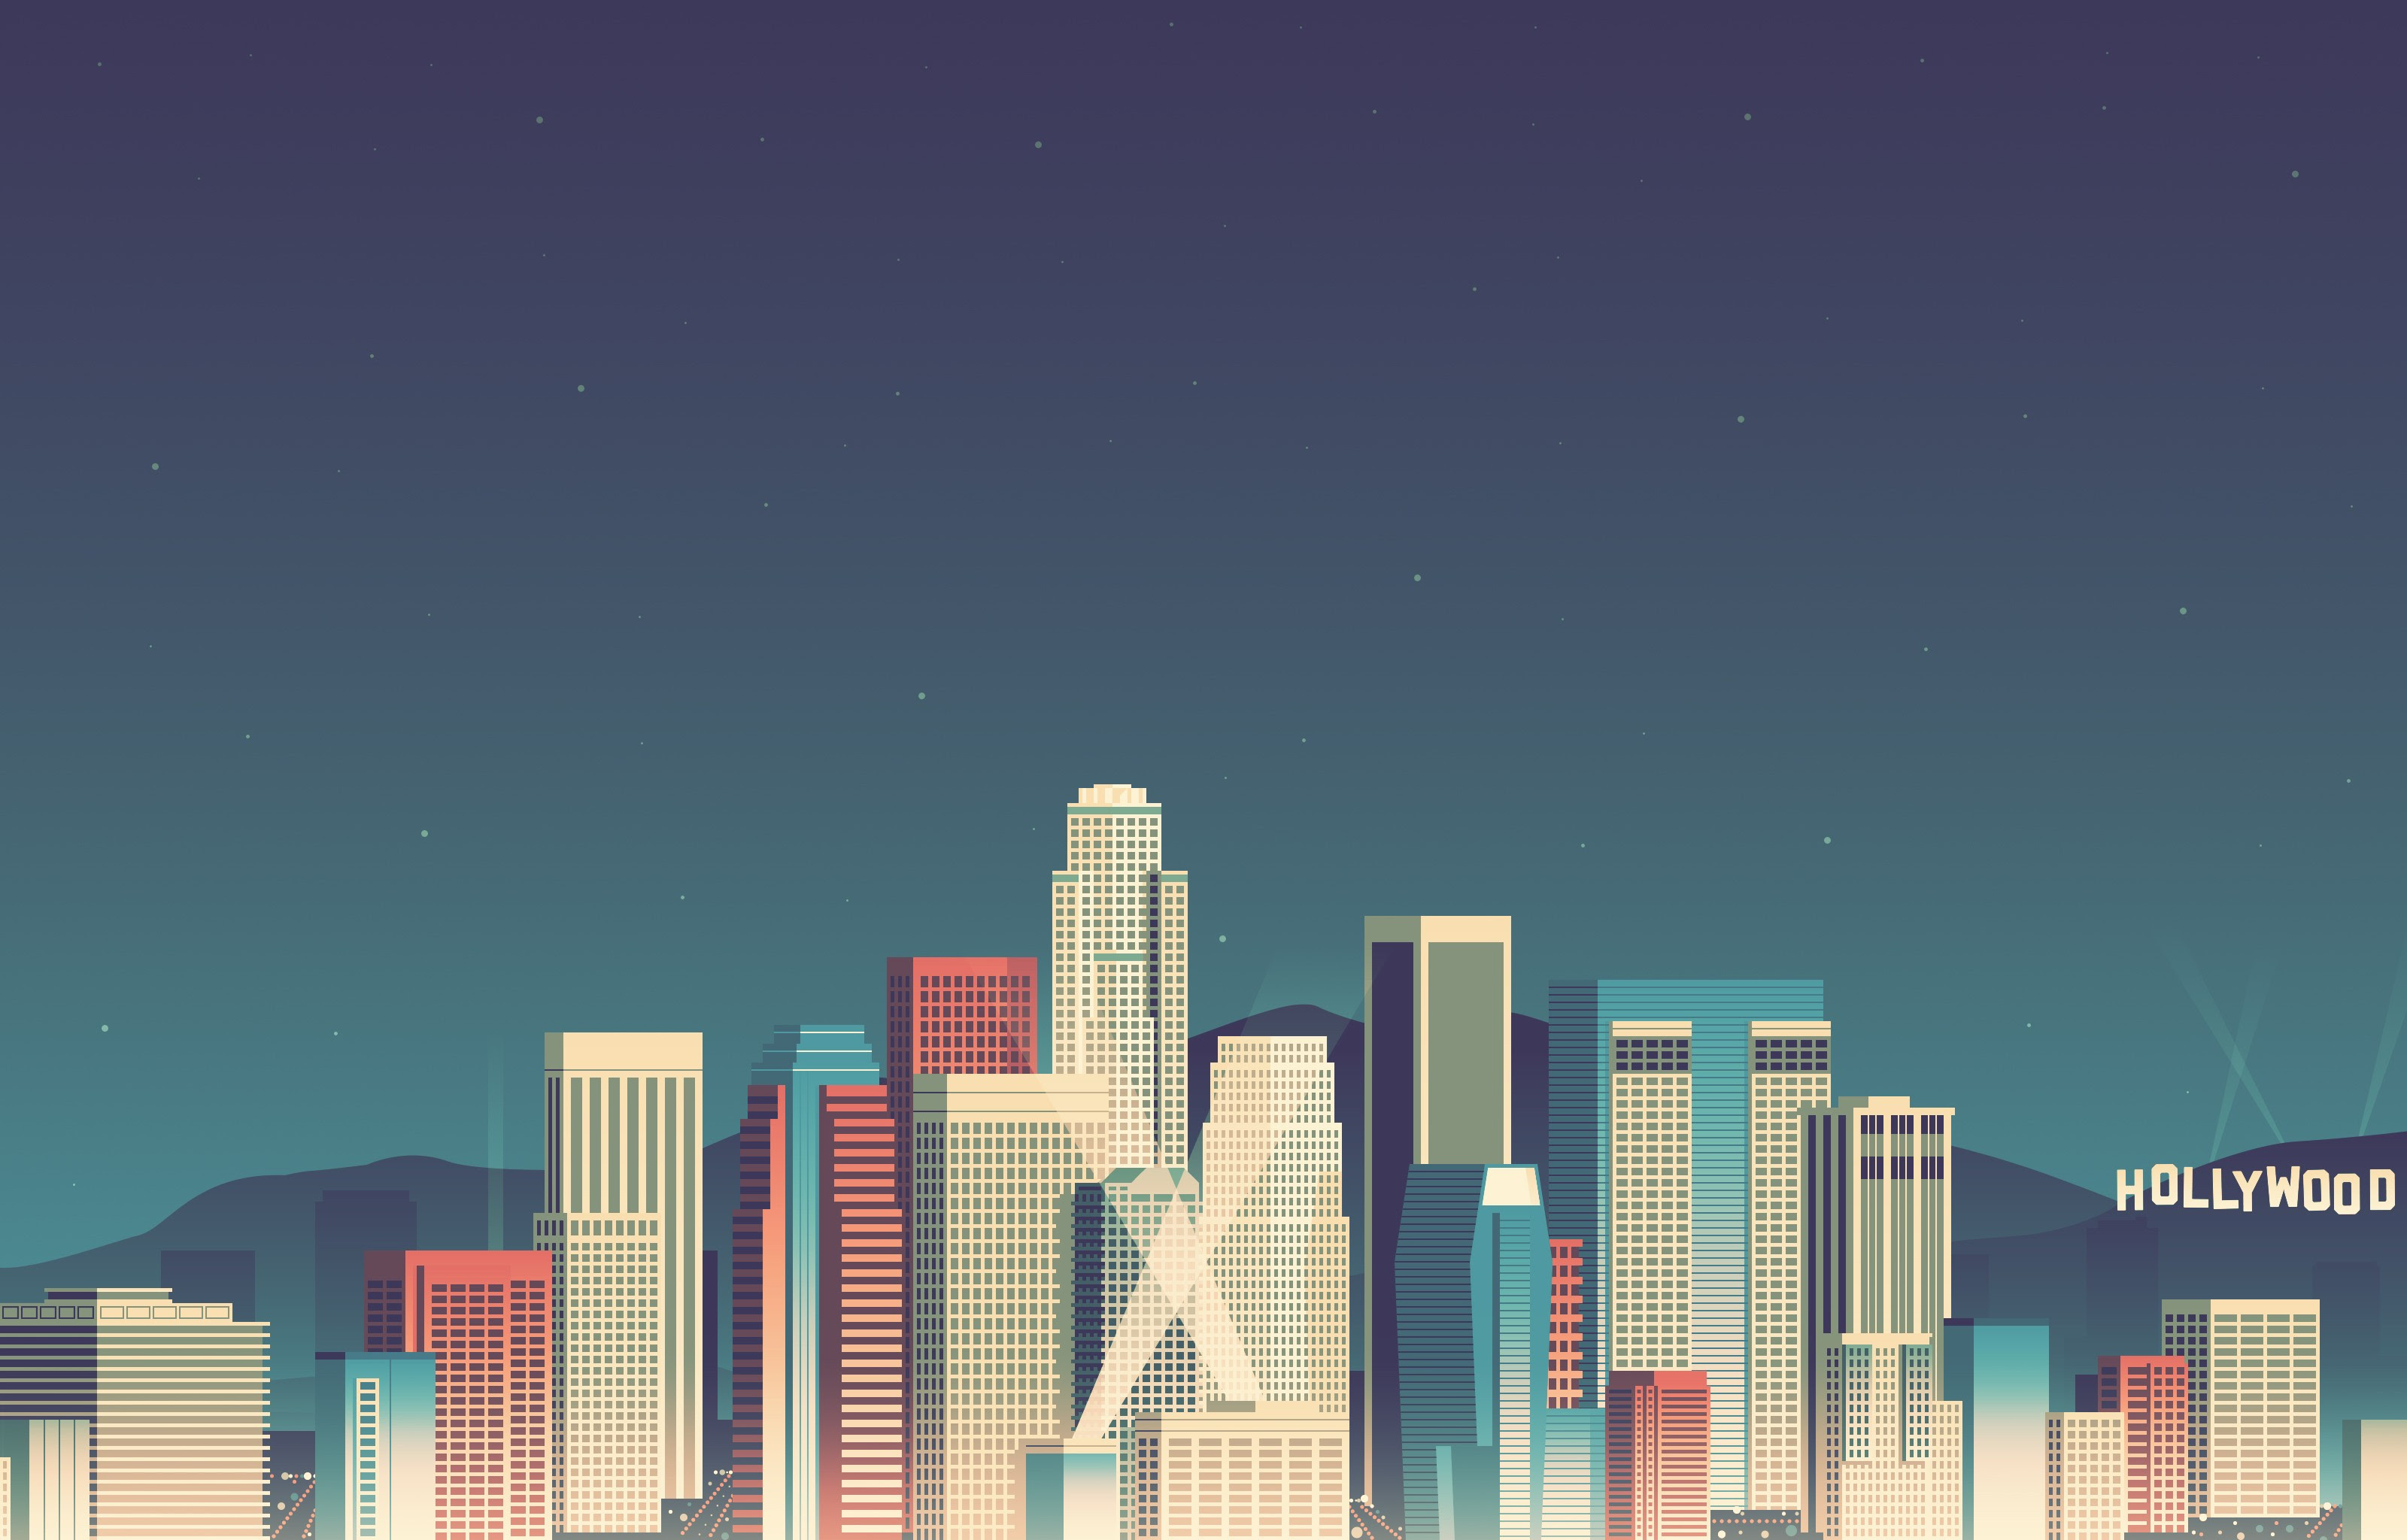 Android Wallpaper: 8-Bit Landscapes - Phandroid